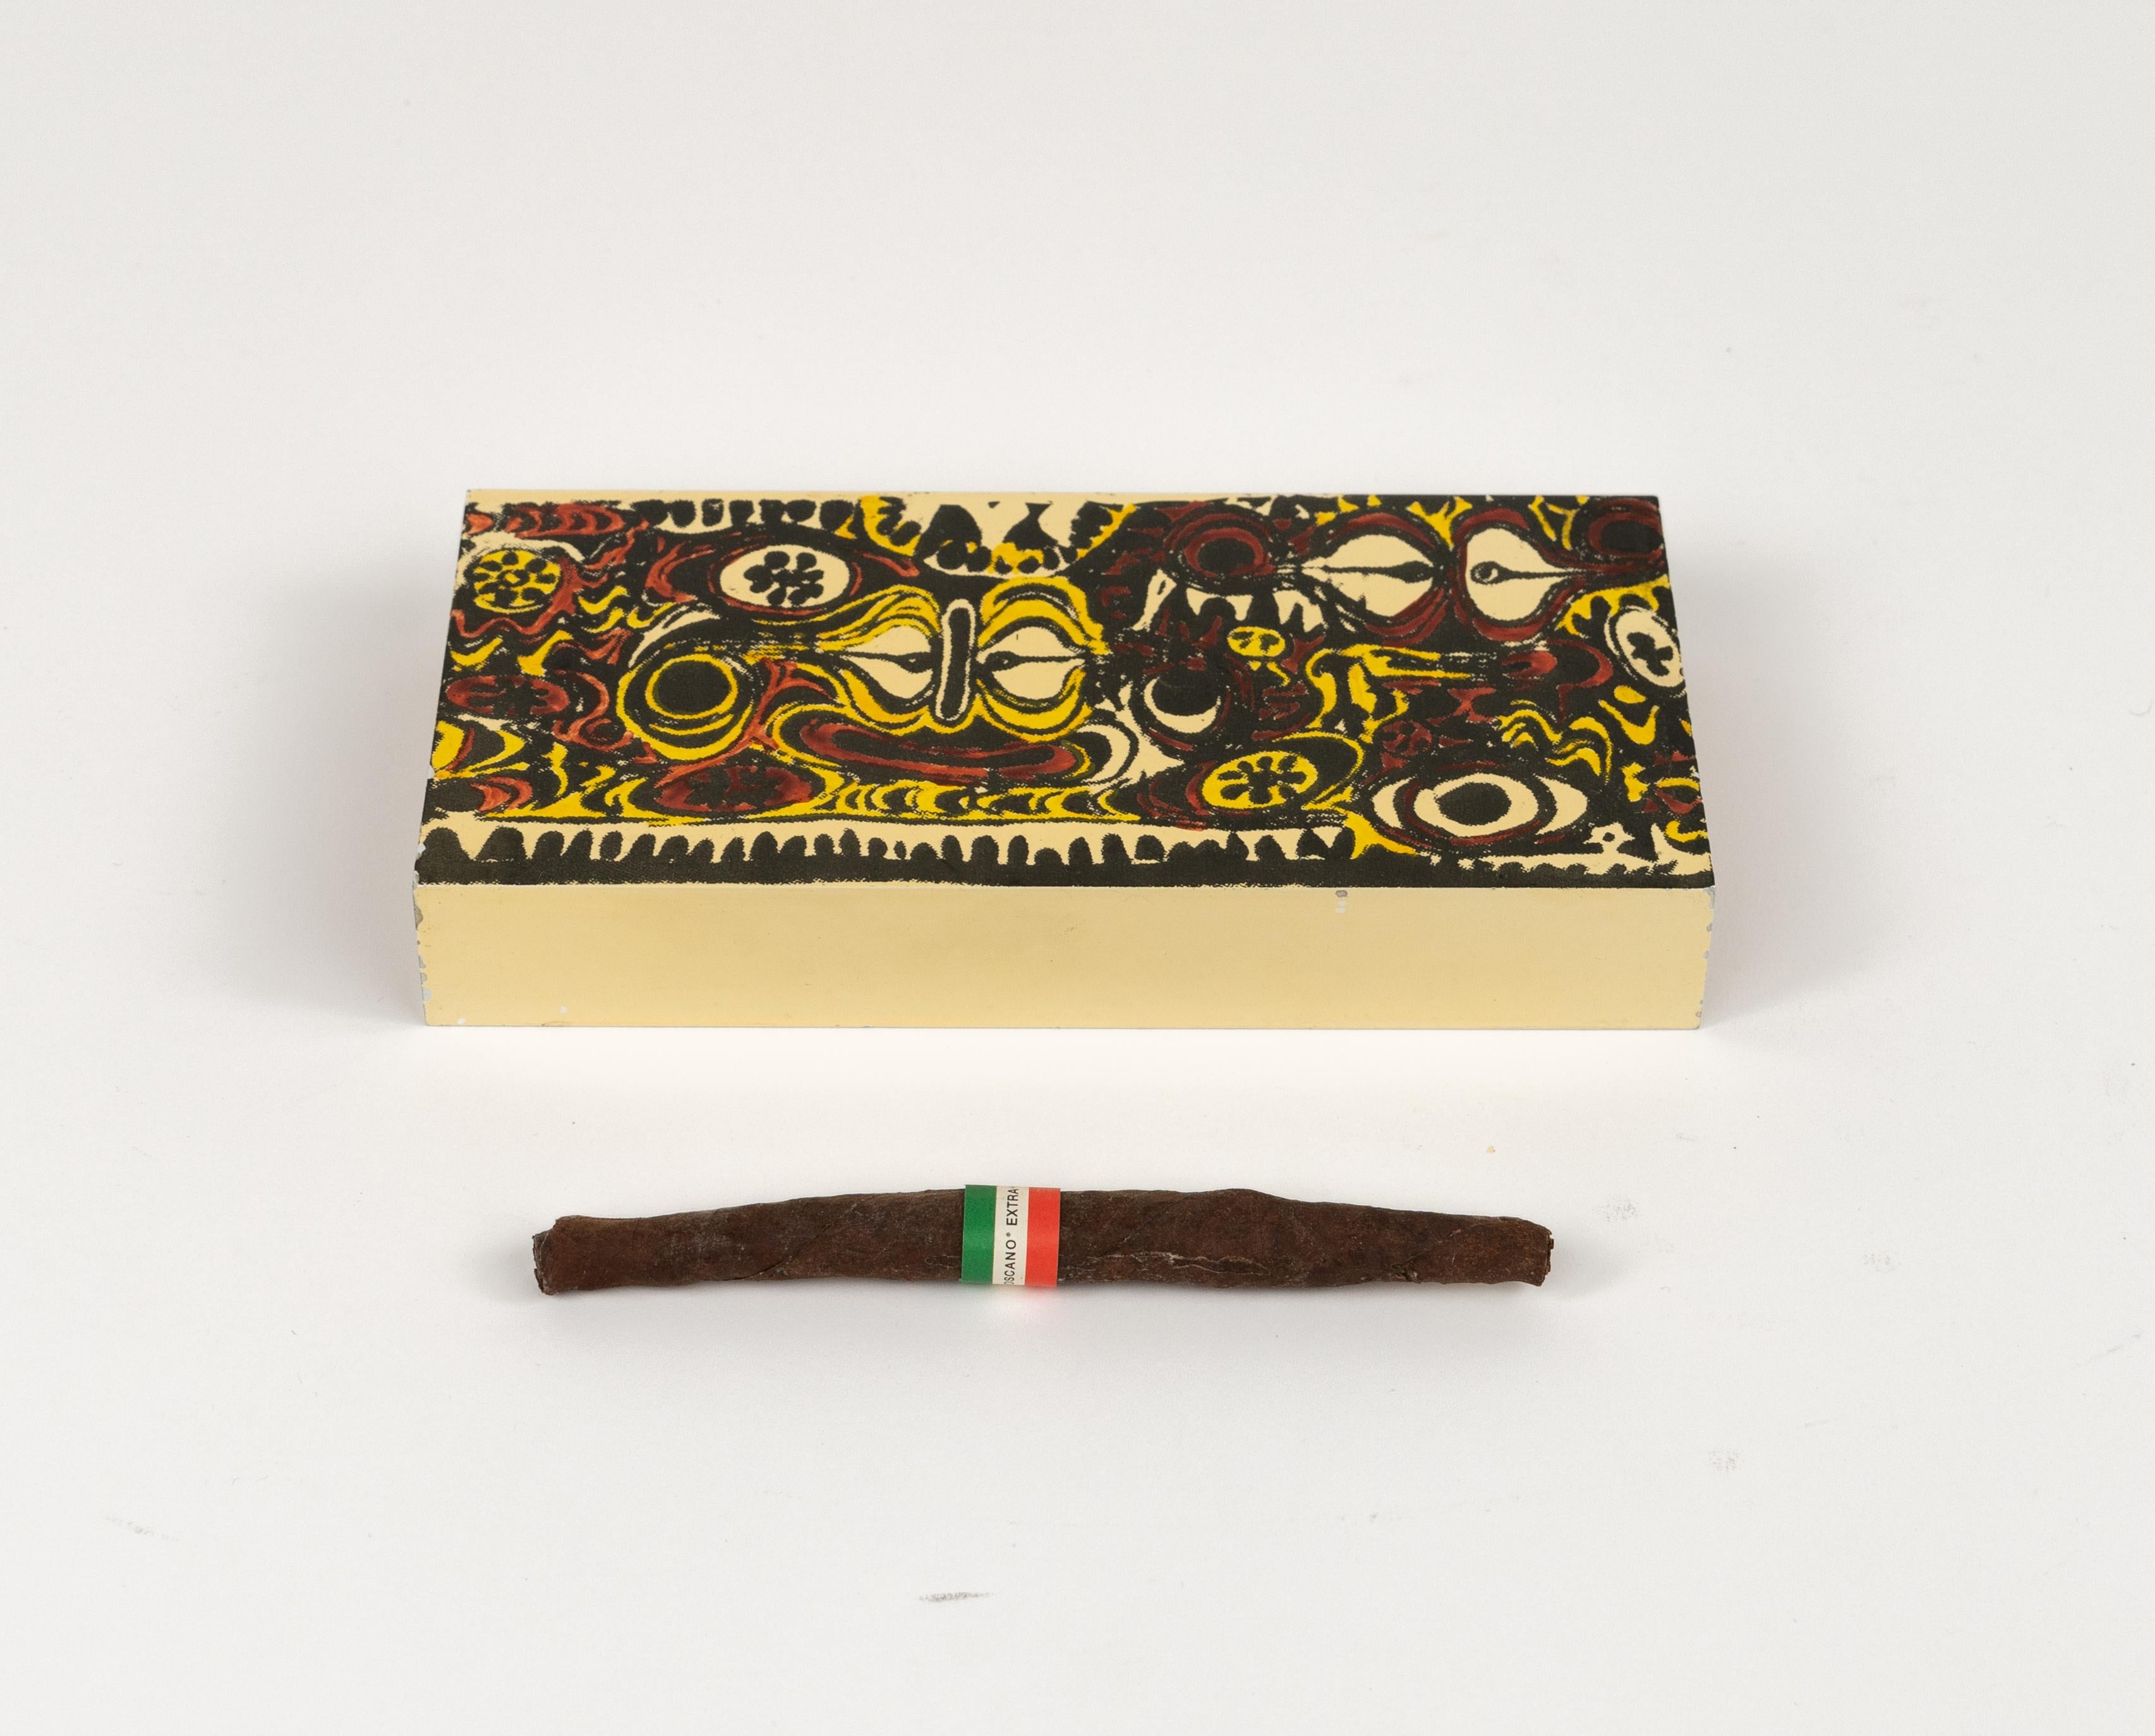 Midcentury Box in Enameled Metal and Wood Att. Piero Fornasetti, Italy 1960s For Sale 4